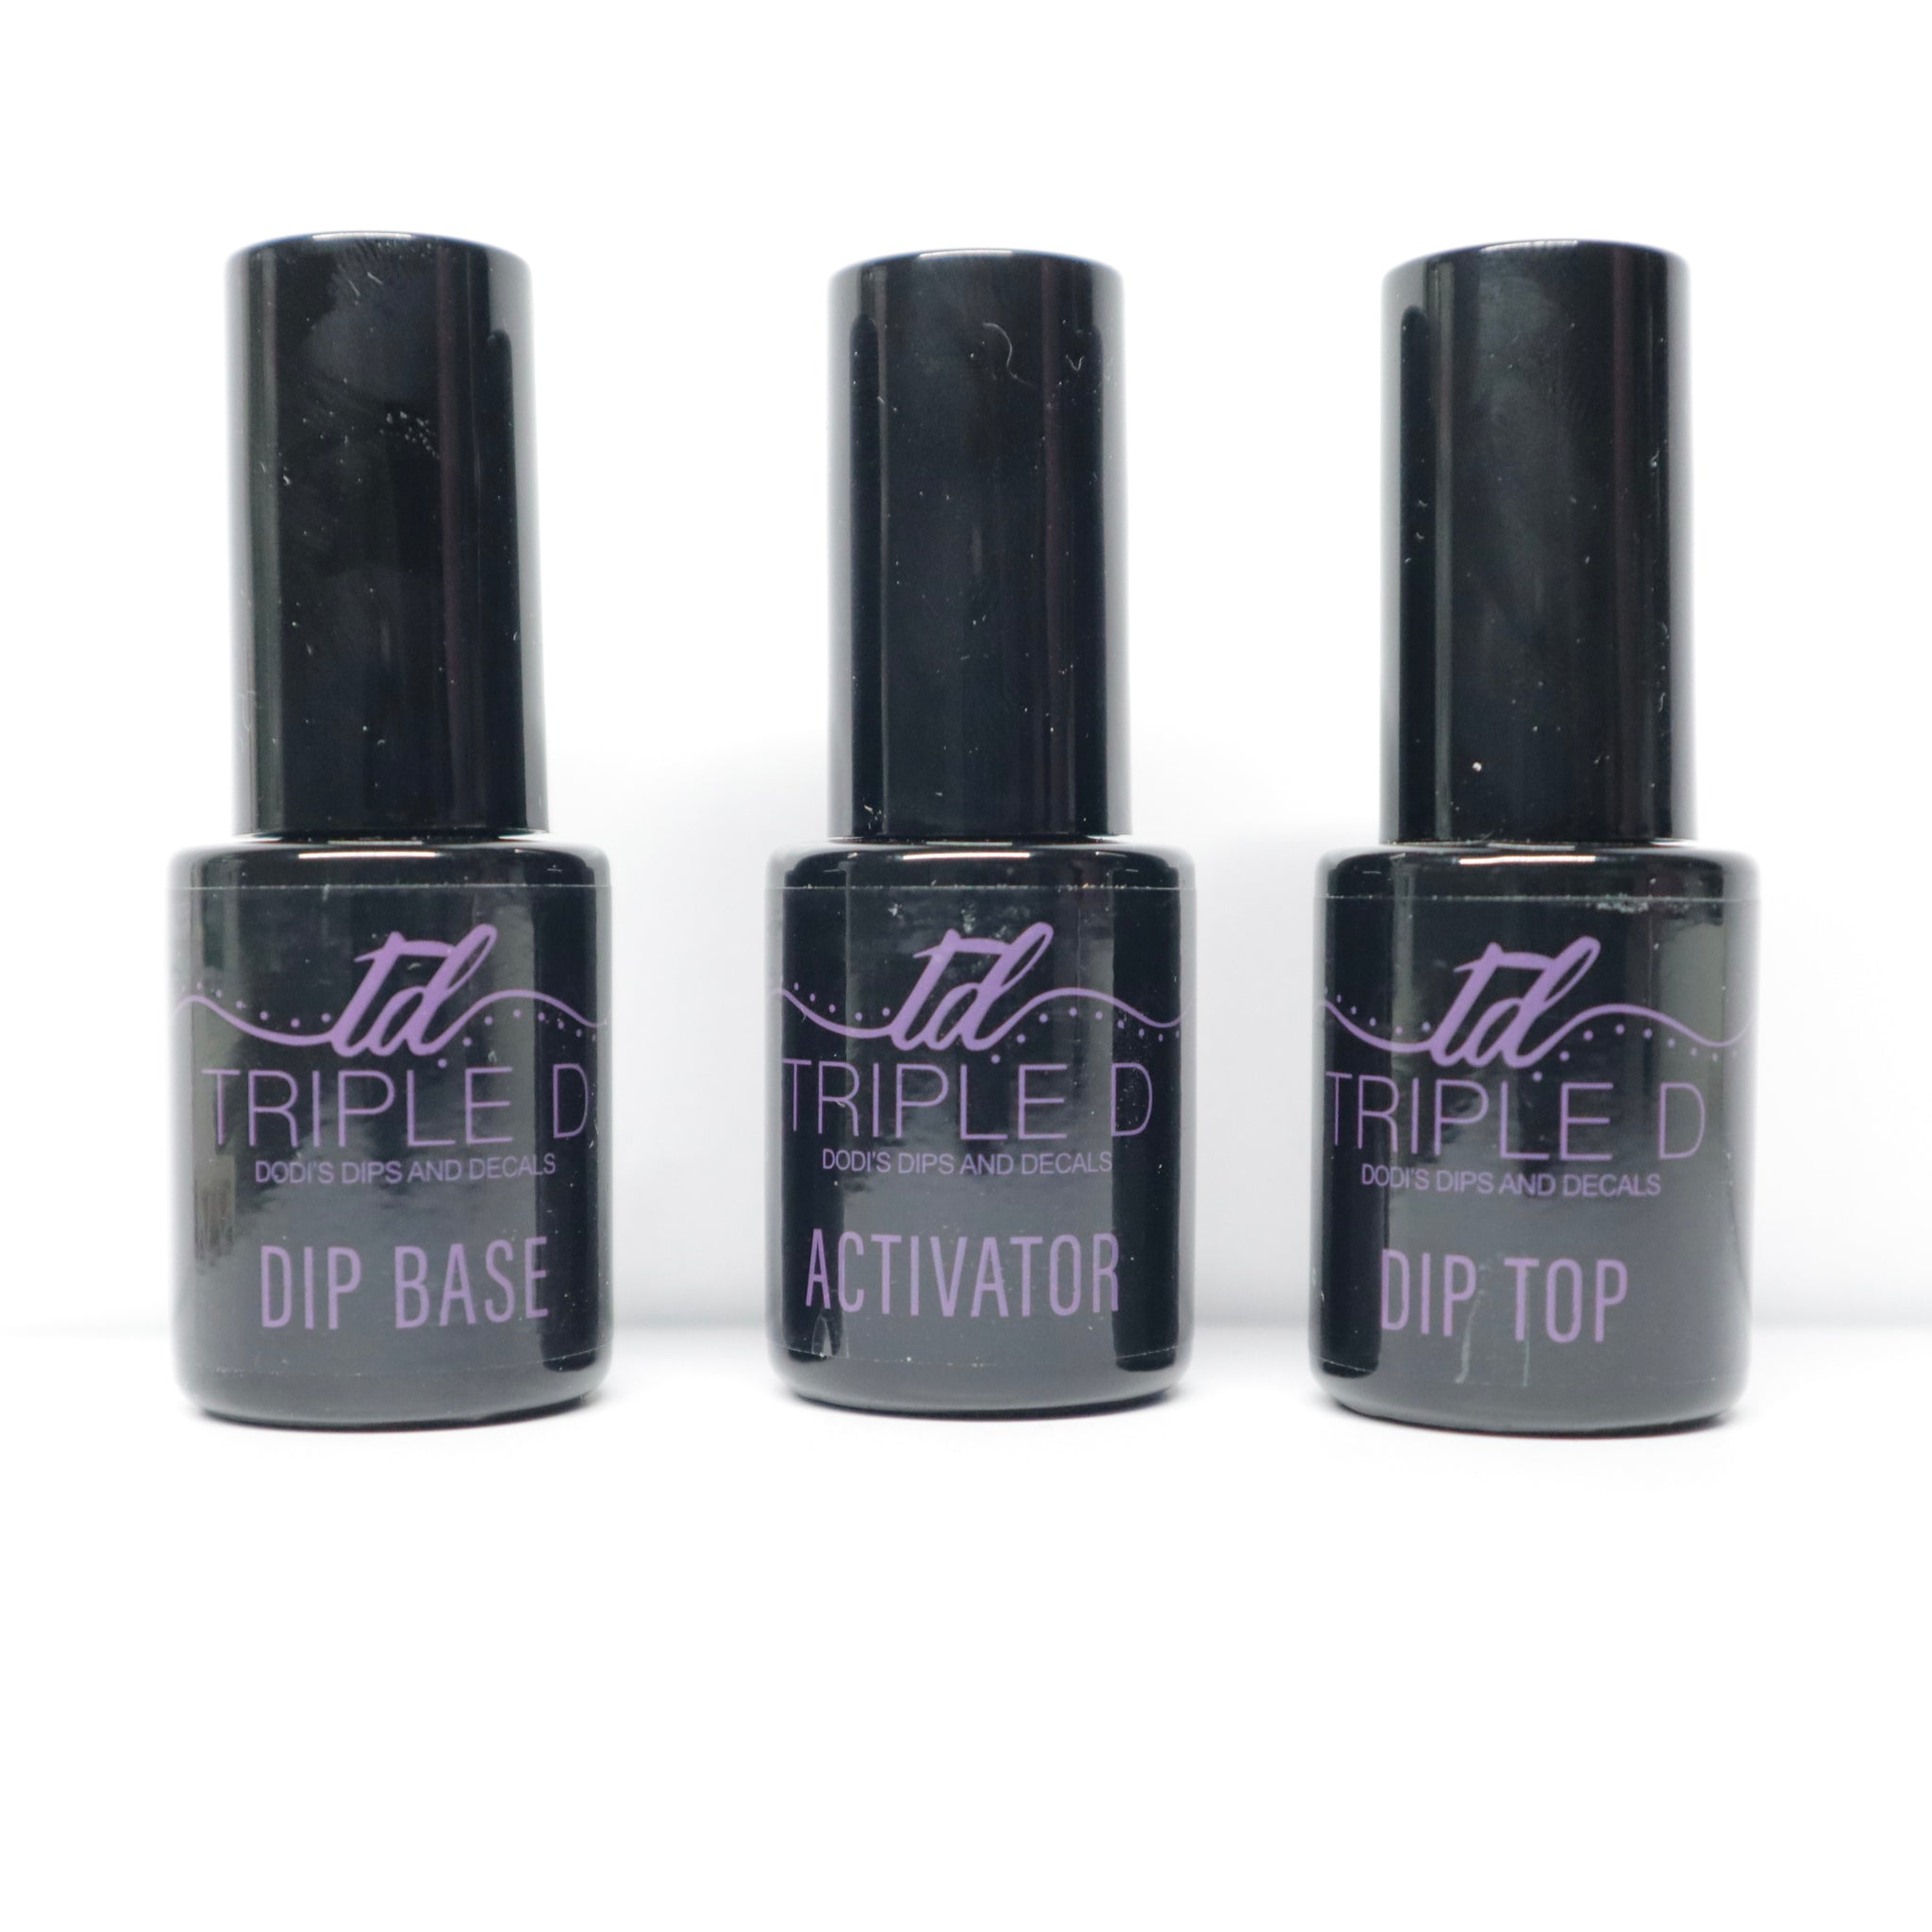 Travel Size Dip Essentials – TRIPLE D DODI'S DIPS AND DECALS